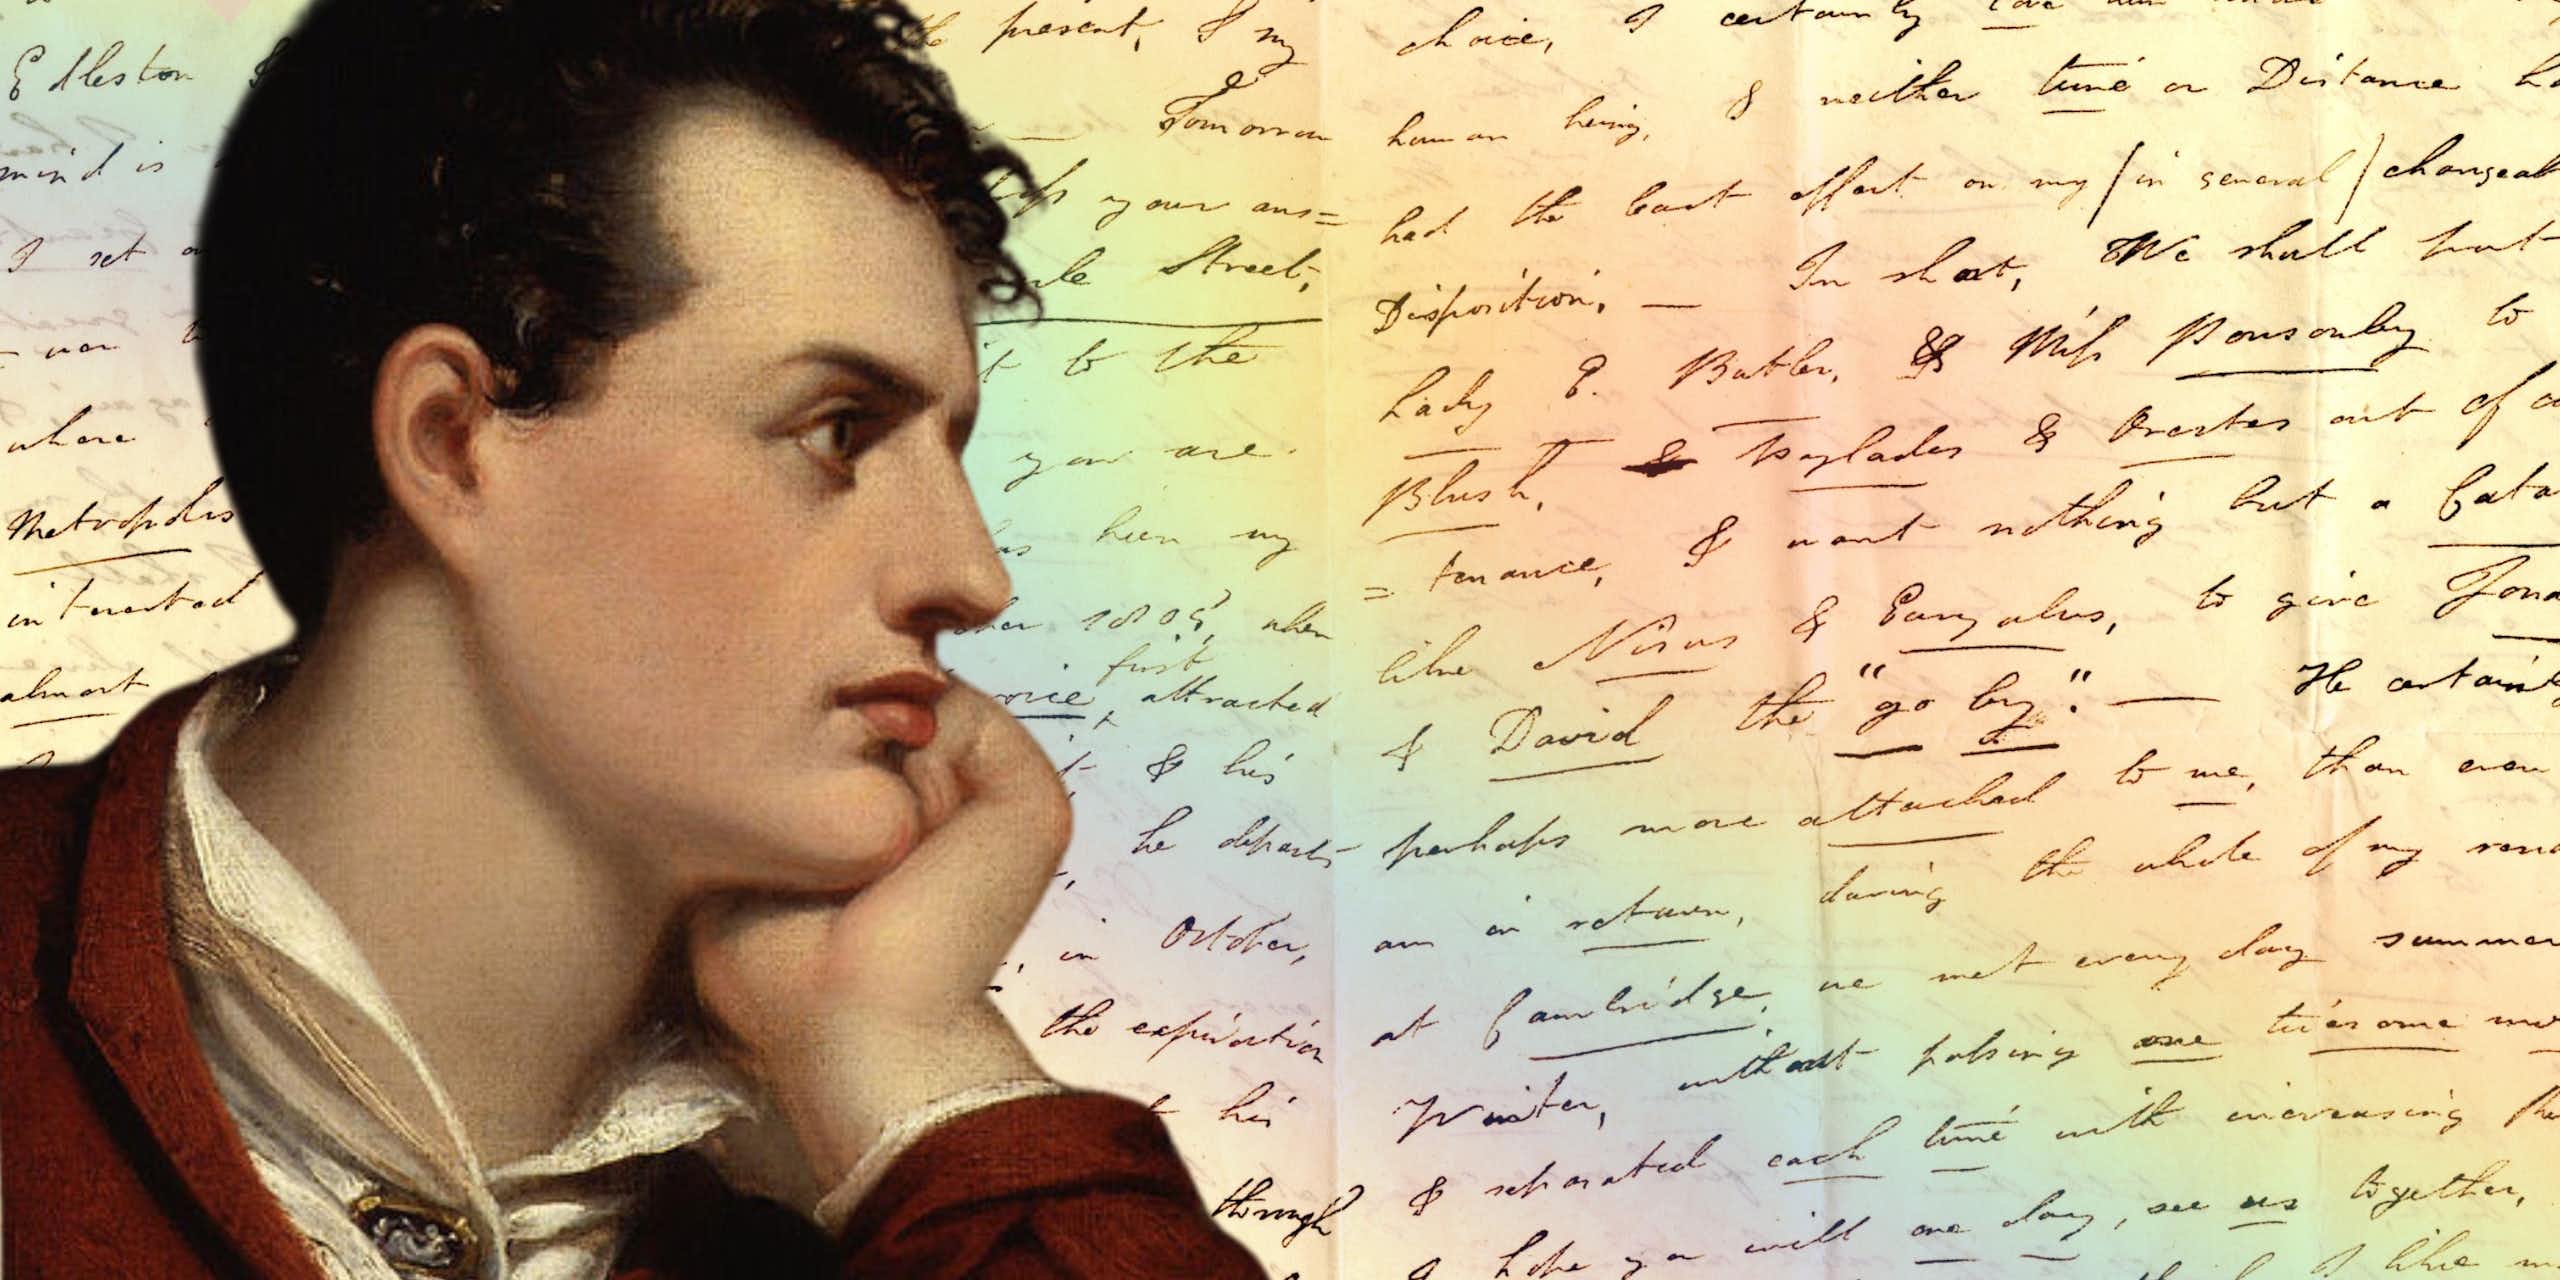 Cutout of Byron over a handwritten letter, with rainbow light